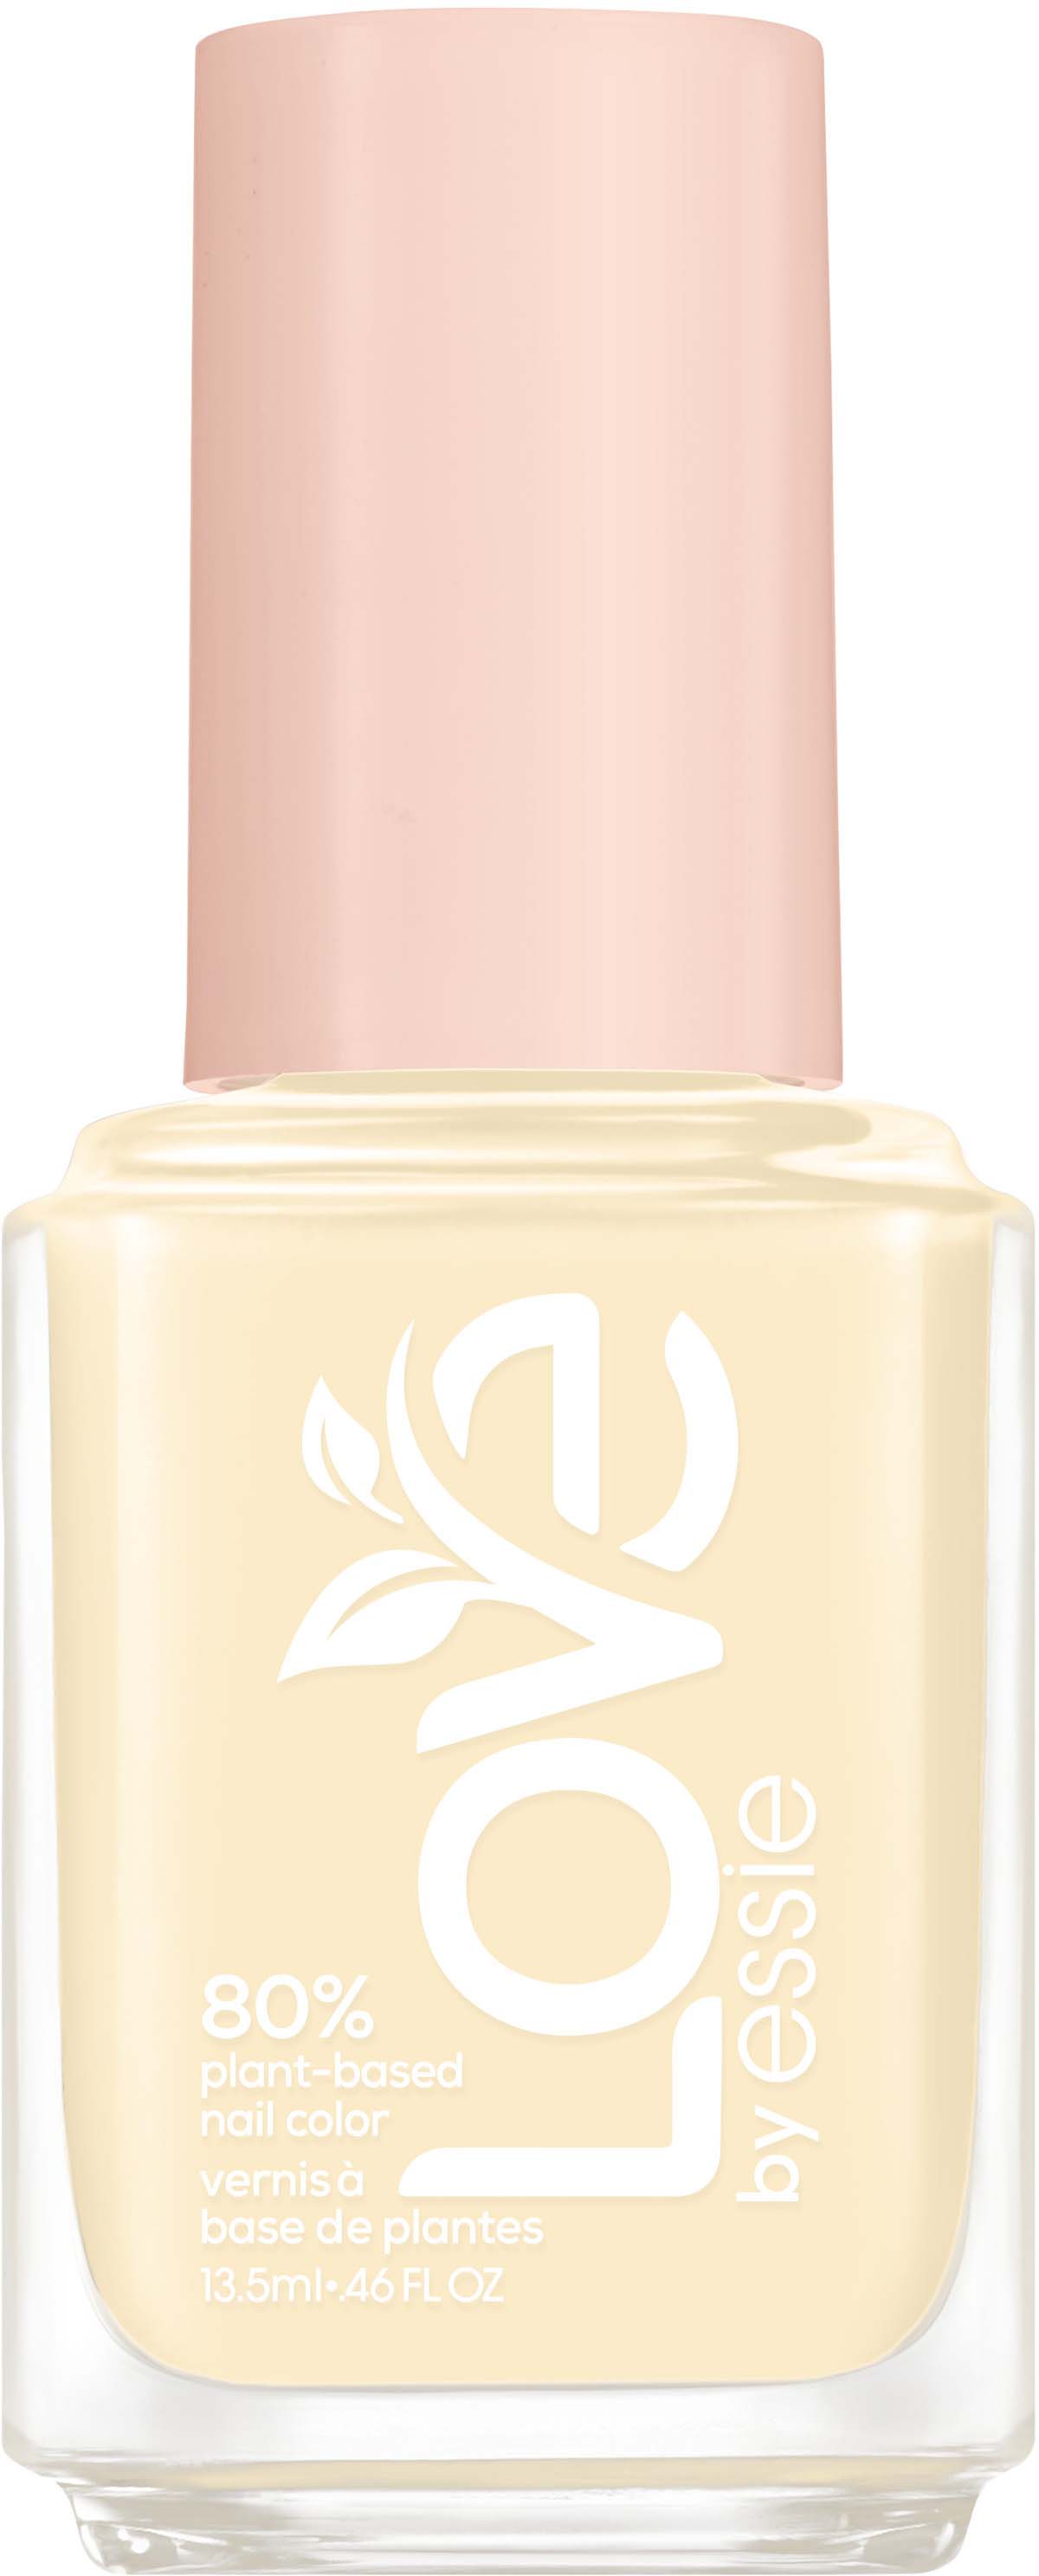 Essie Essie Plant-based On by The Color Brighter Side 230 Nail LOVE 80%